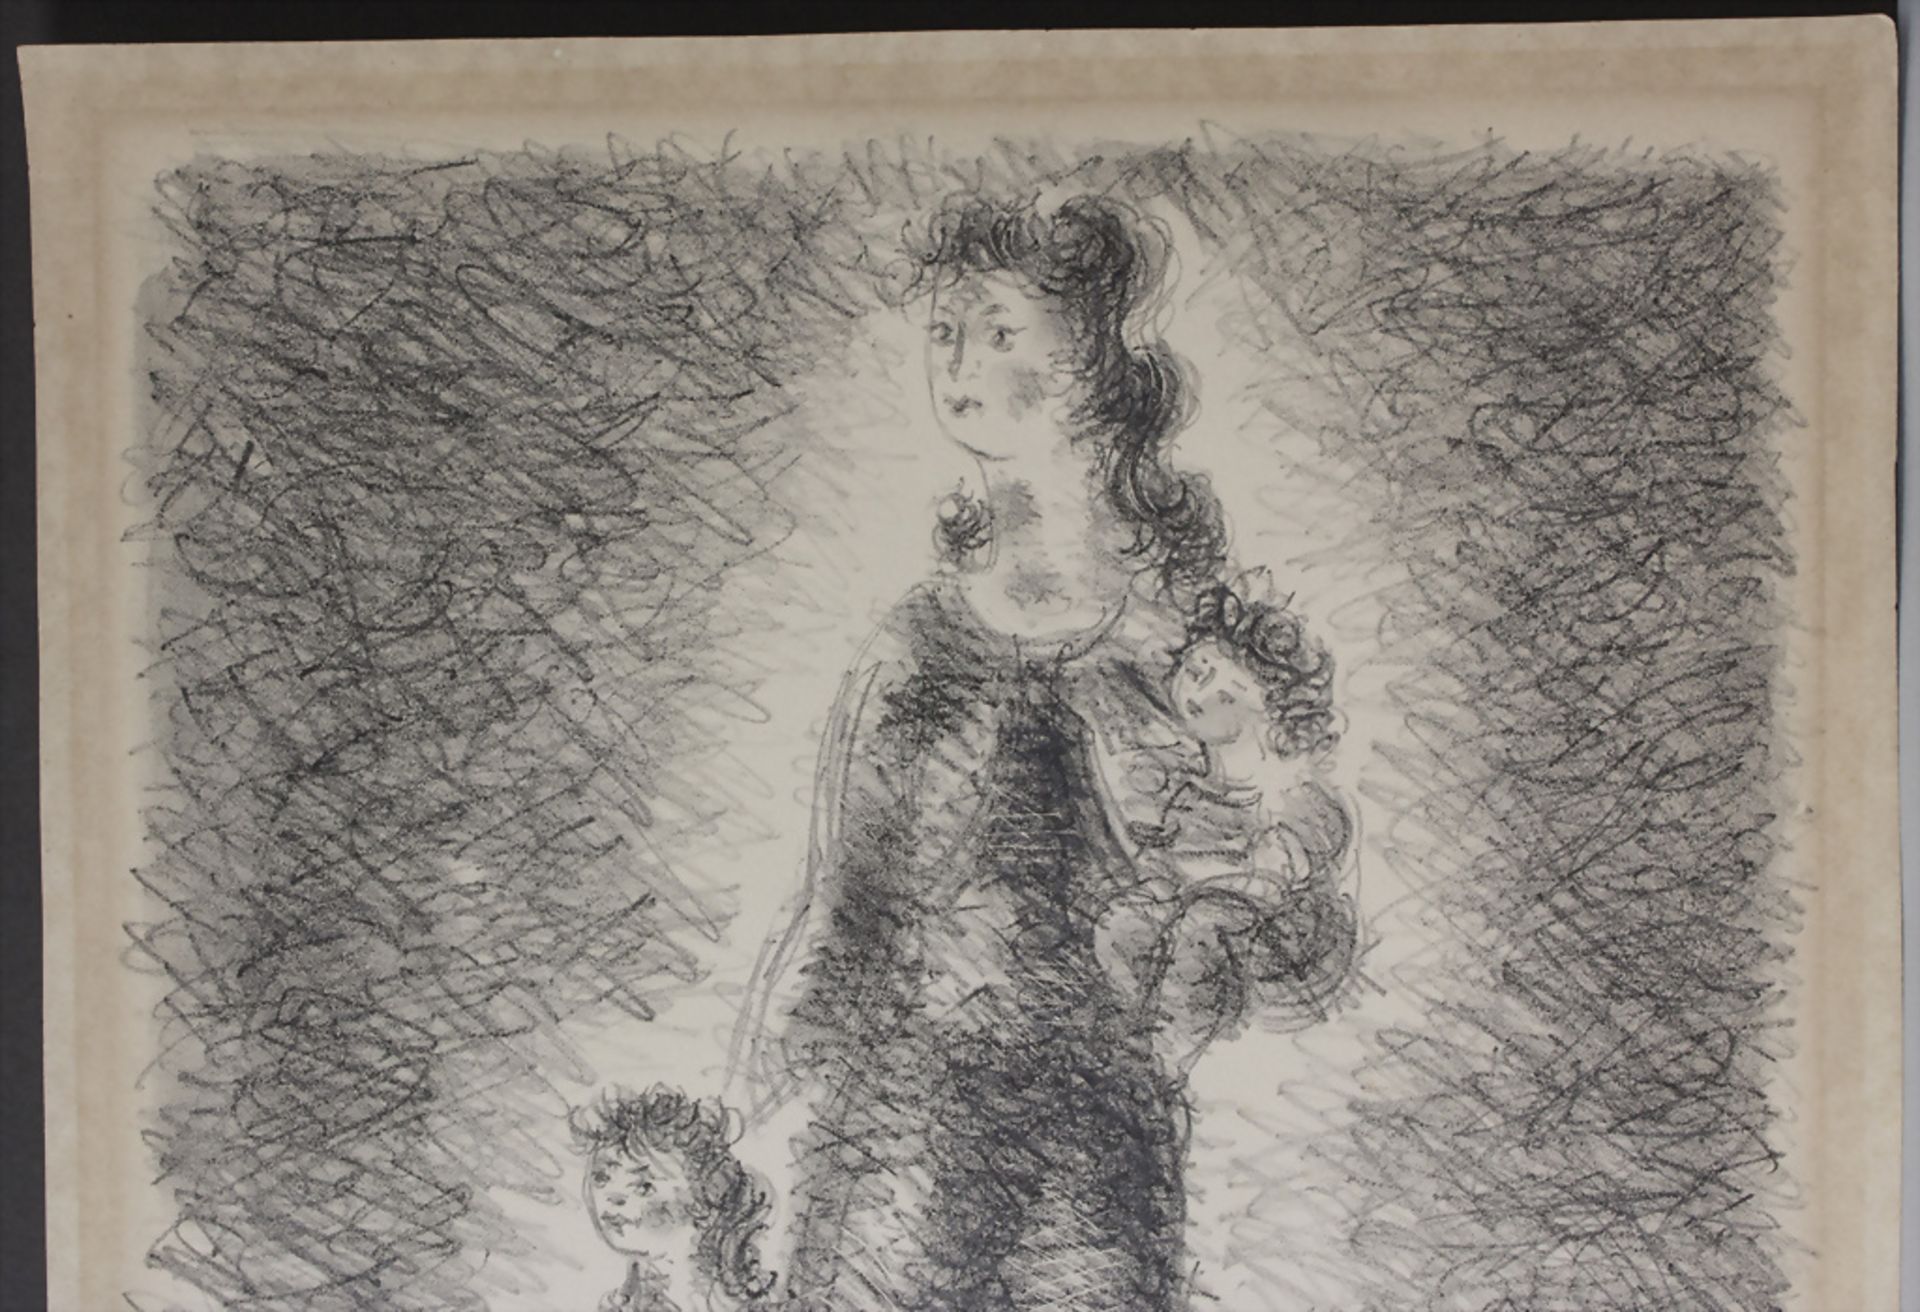 Chaim Gross (1904-1991), 'Mütter mit Kindern' / 'Mothers with children', 20. Jh. - Image 3 of 4